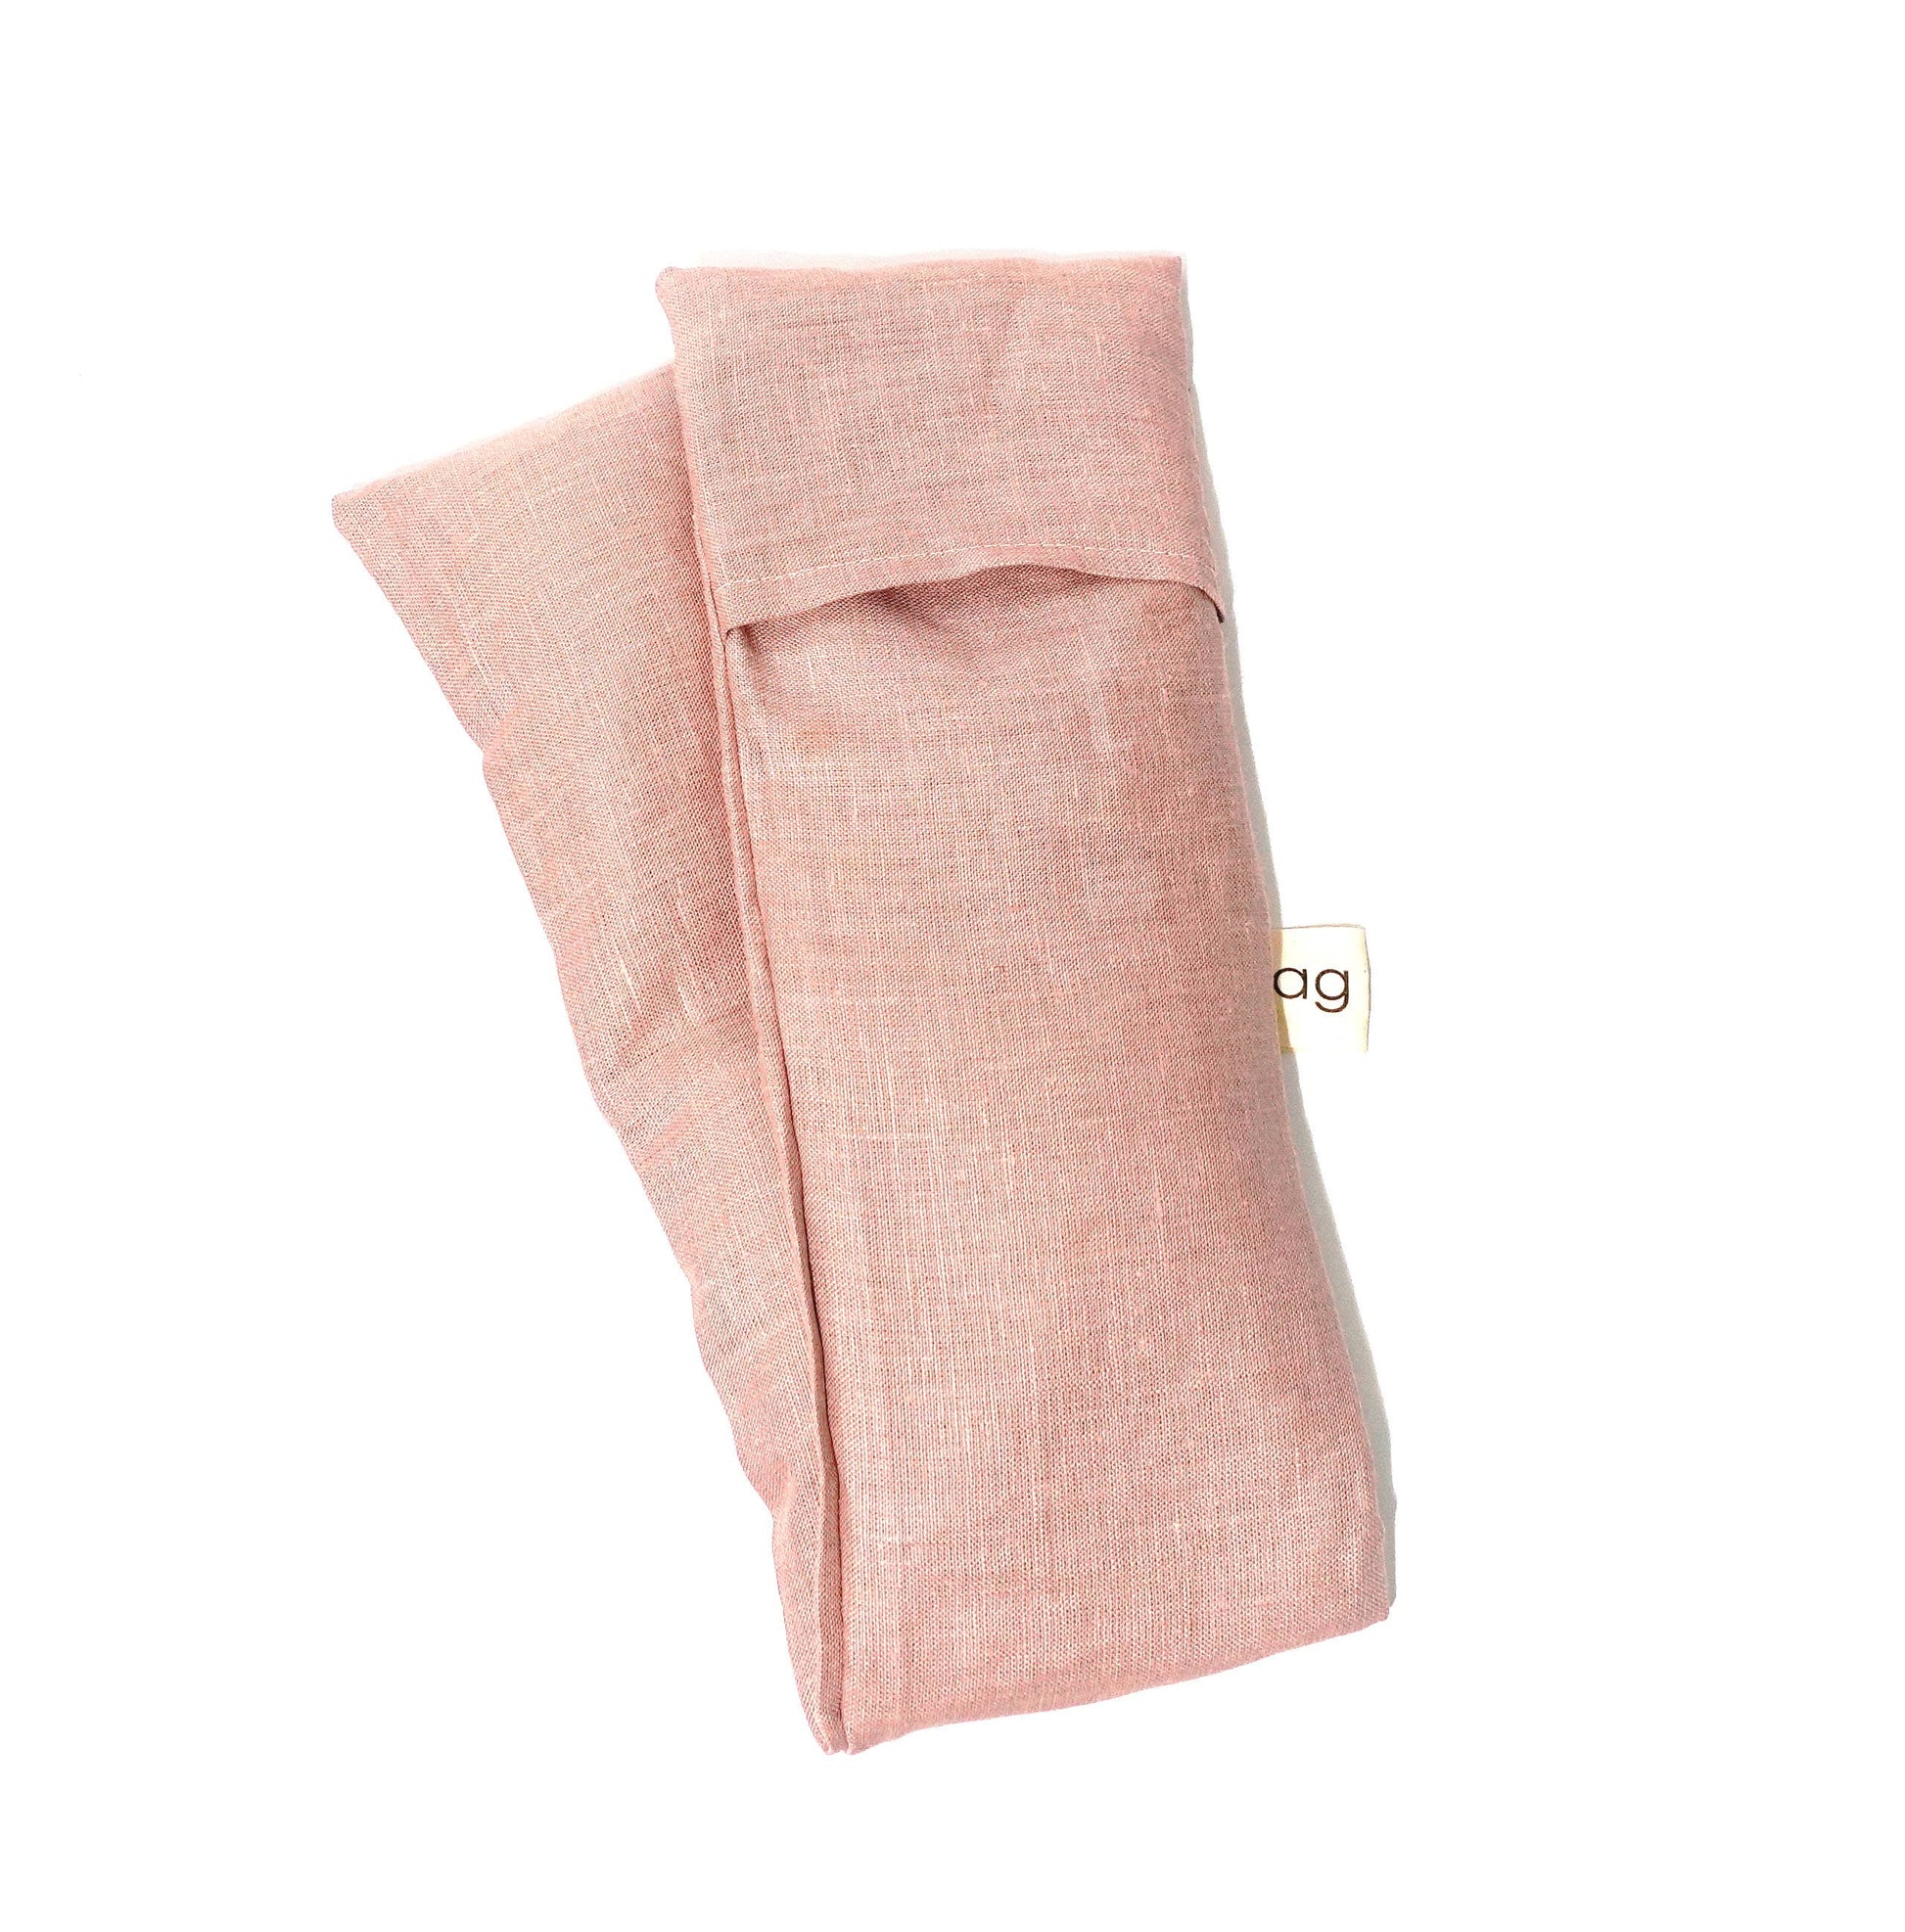 The Comfort Body Wrap Set ardent goods: Blush - The Crowd Went Wild